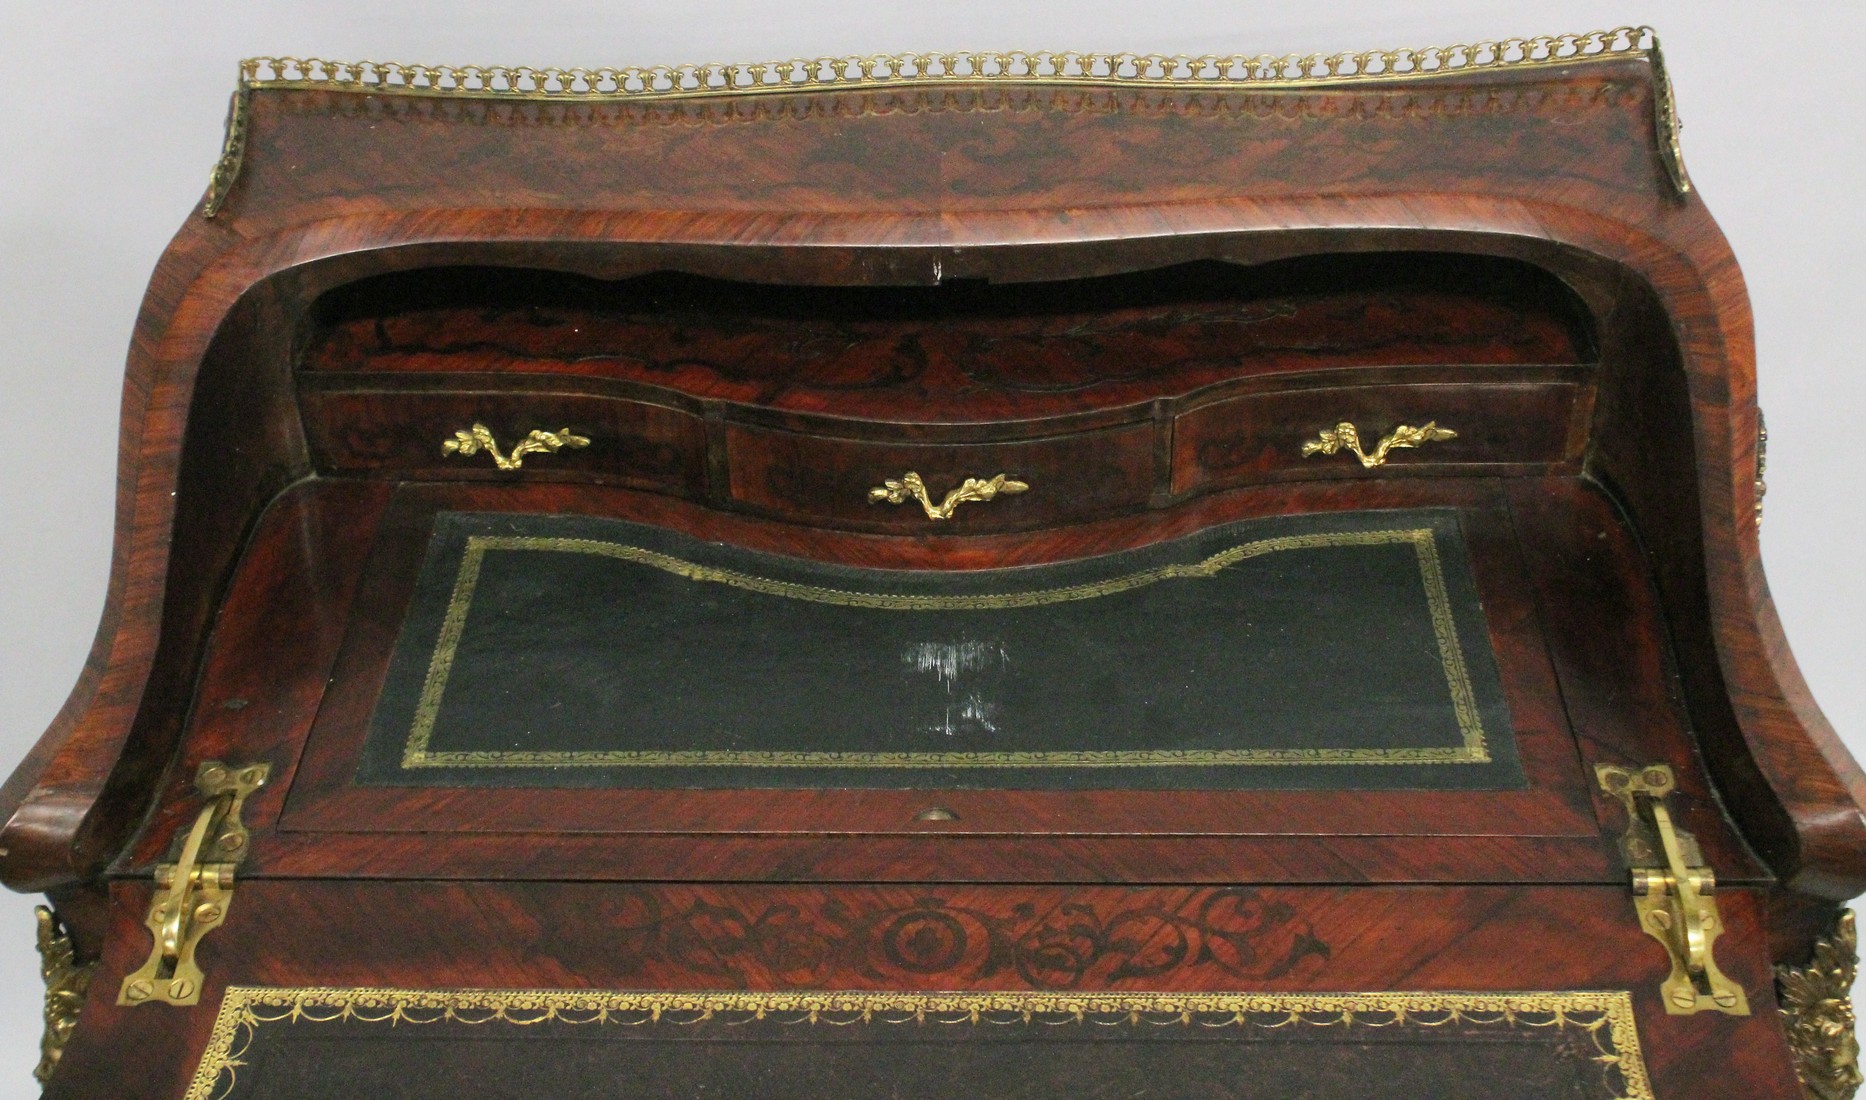 A SUPERB 19TH CENTURY LOUIS XVI STYLE KINGWOOD BUREAU with brass grill, ormolu mounts and inset with - Image 7 of 12